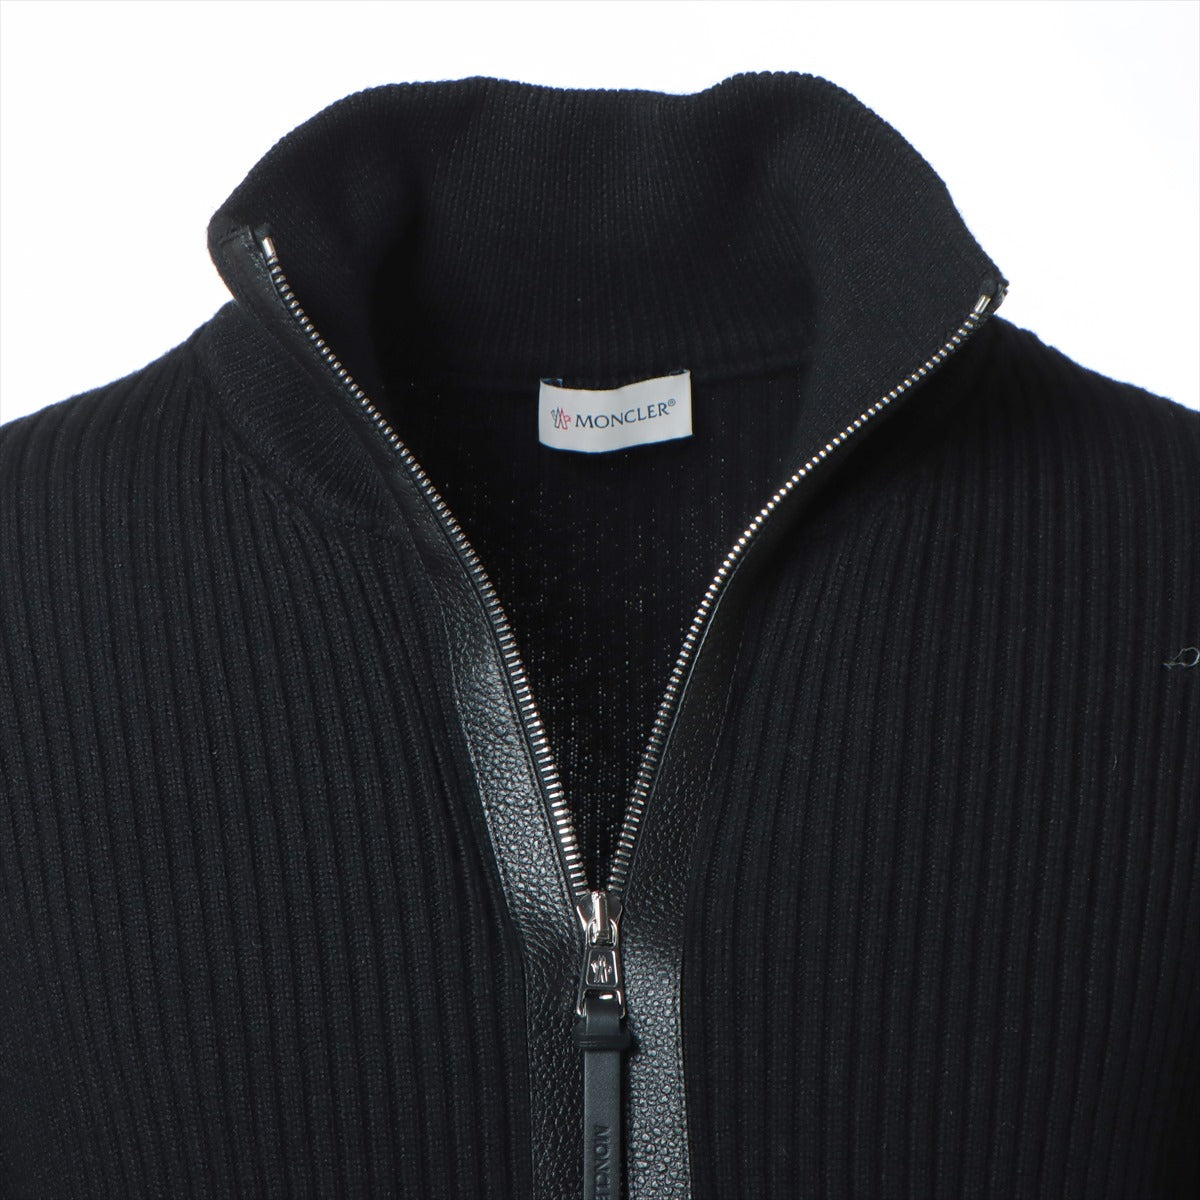 Moncler 22AW Wool Knit L Men's Black  Drivers leather piping Zip up